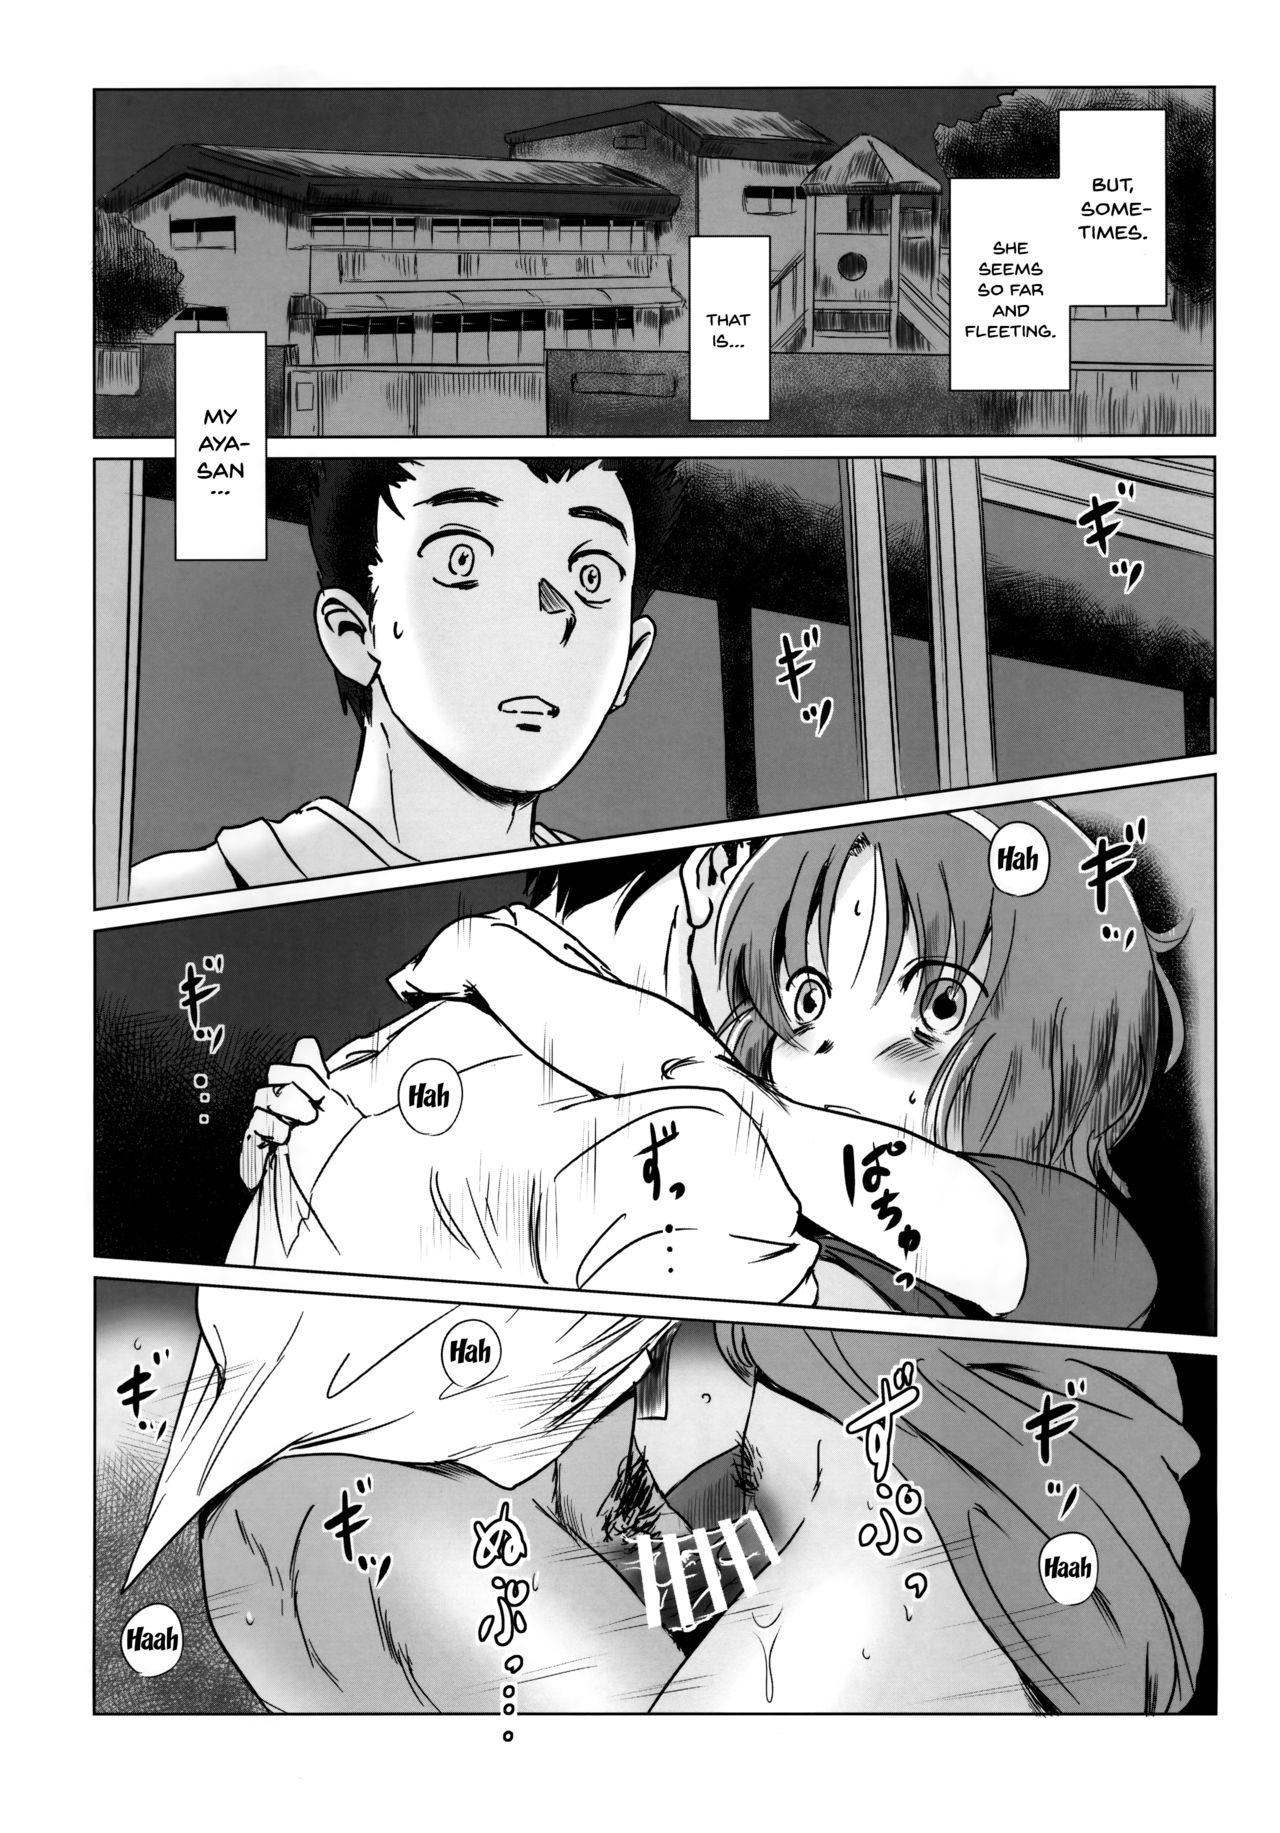 Oralsex Story of the 'N' Situation - Situation#1 Kyouhaku - Original Spreading - Page 3